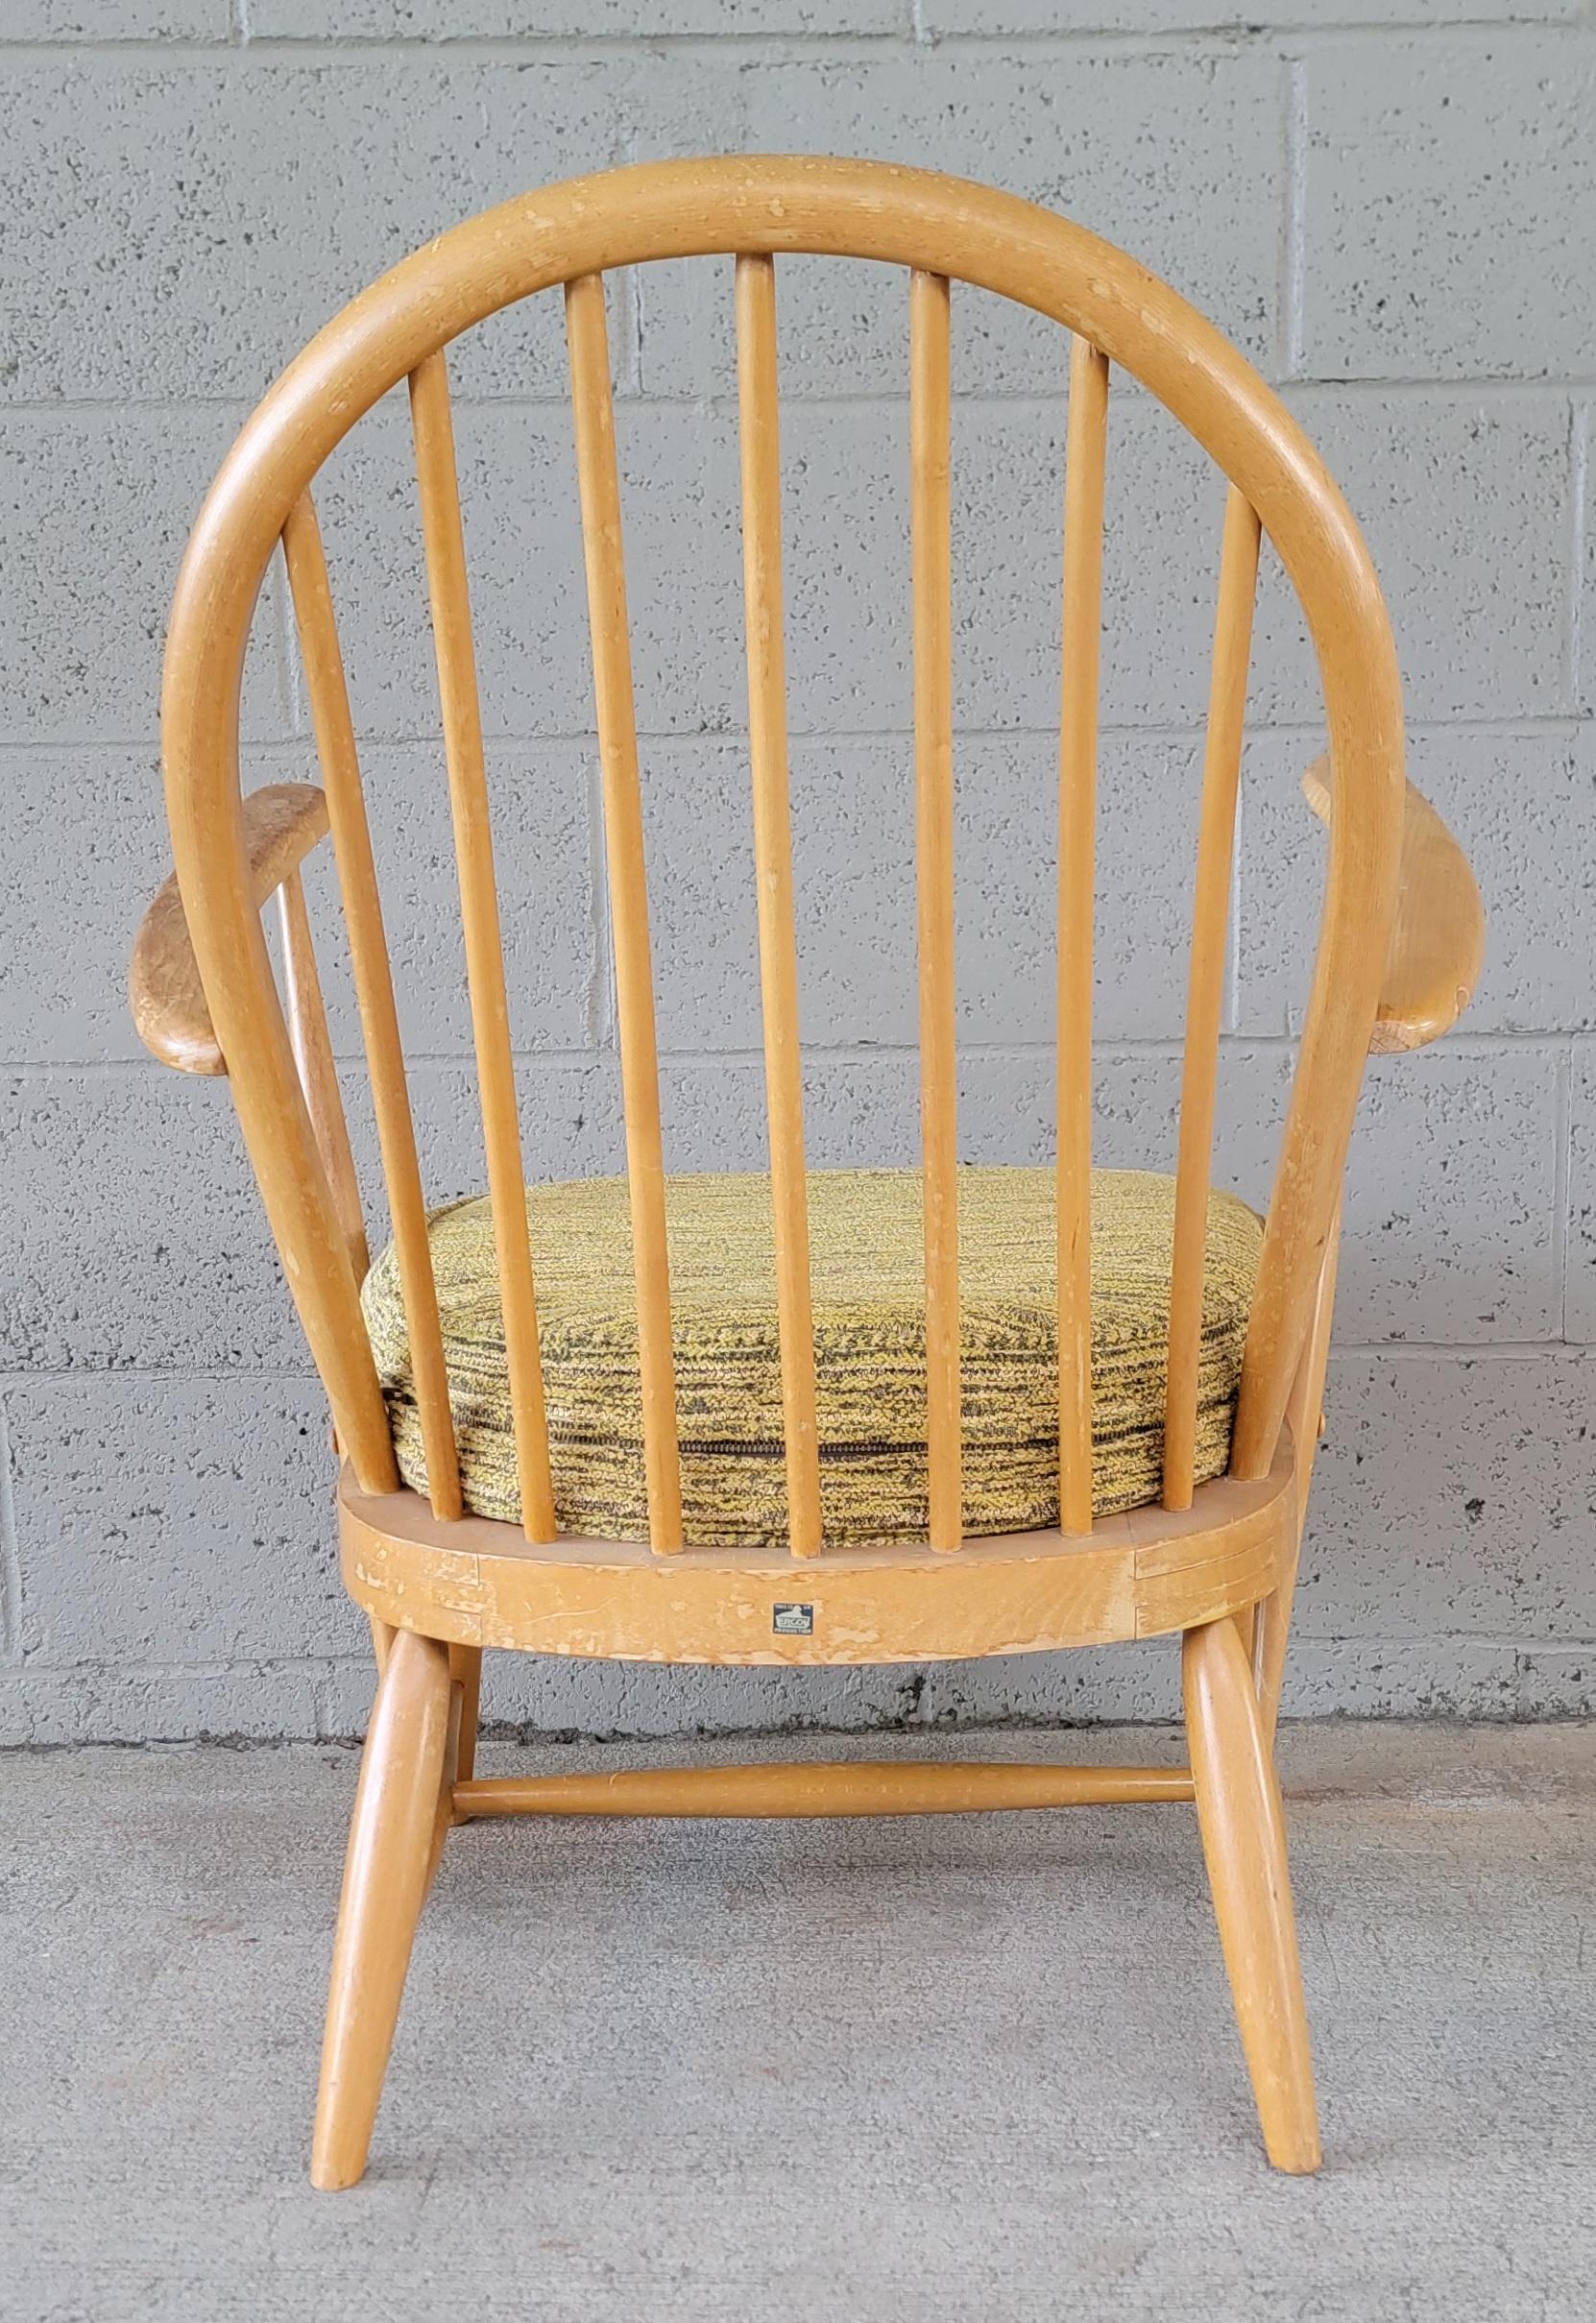 English Lucian Ercolani for Ercol, Beech Wood Hoop Back Lounge Chair. 1960's For Sale